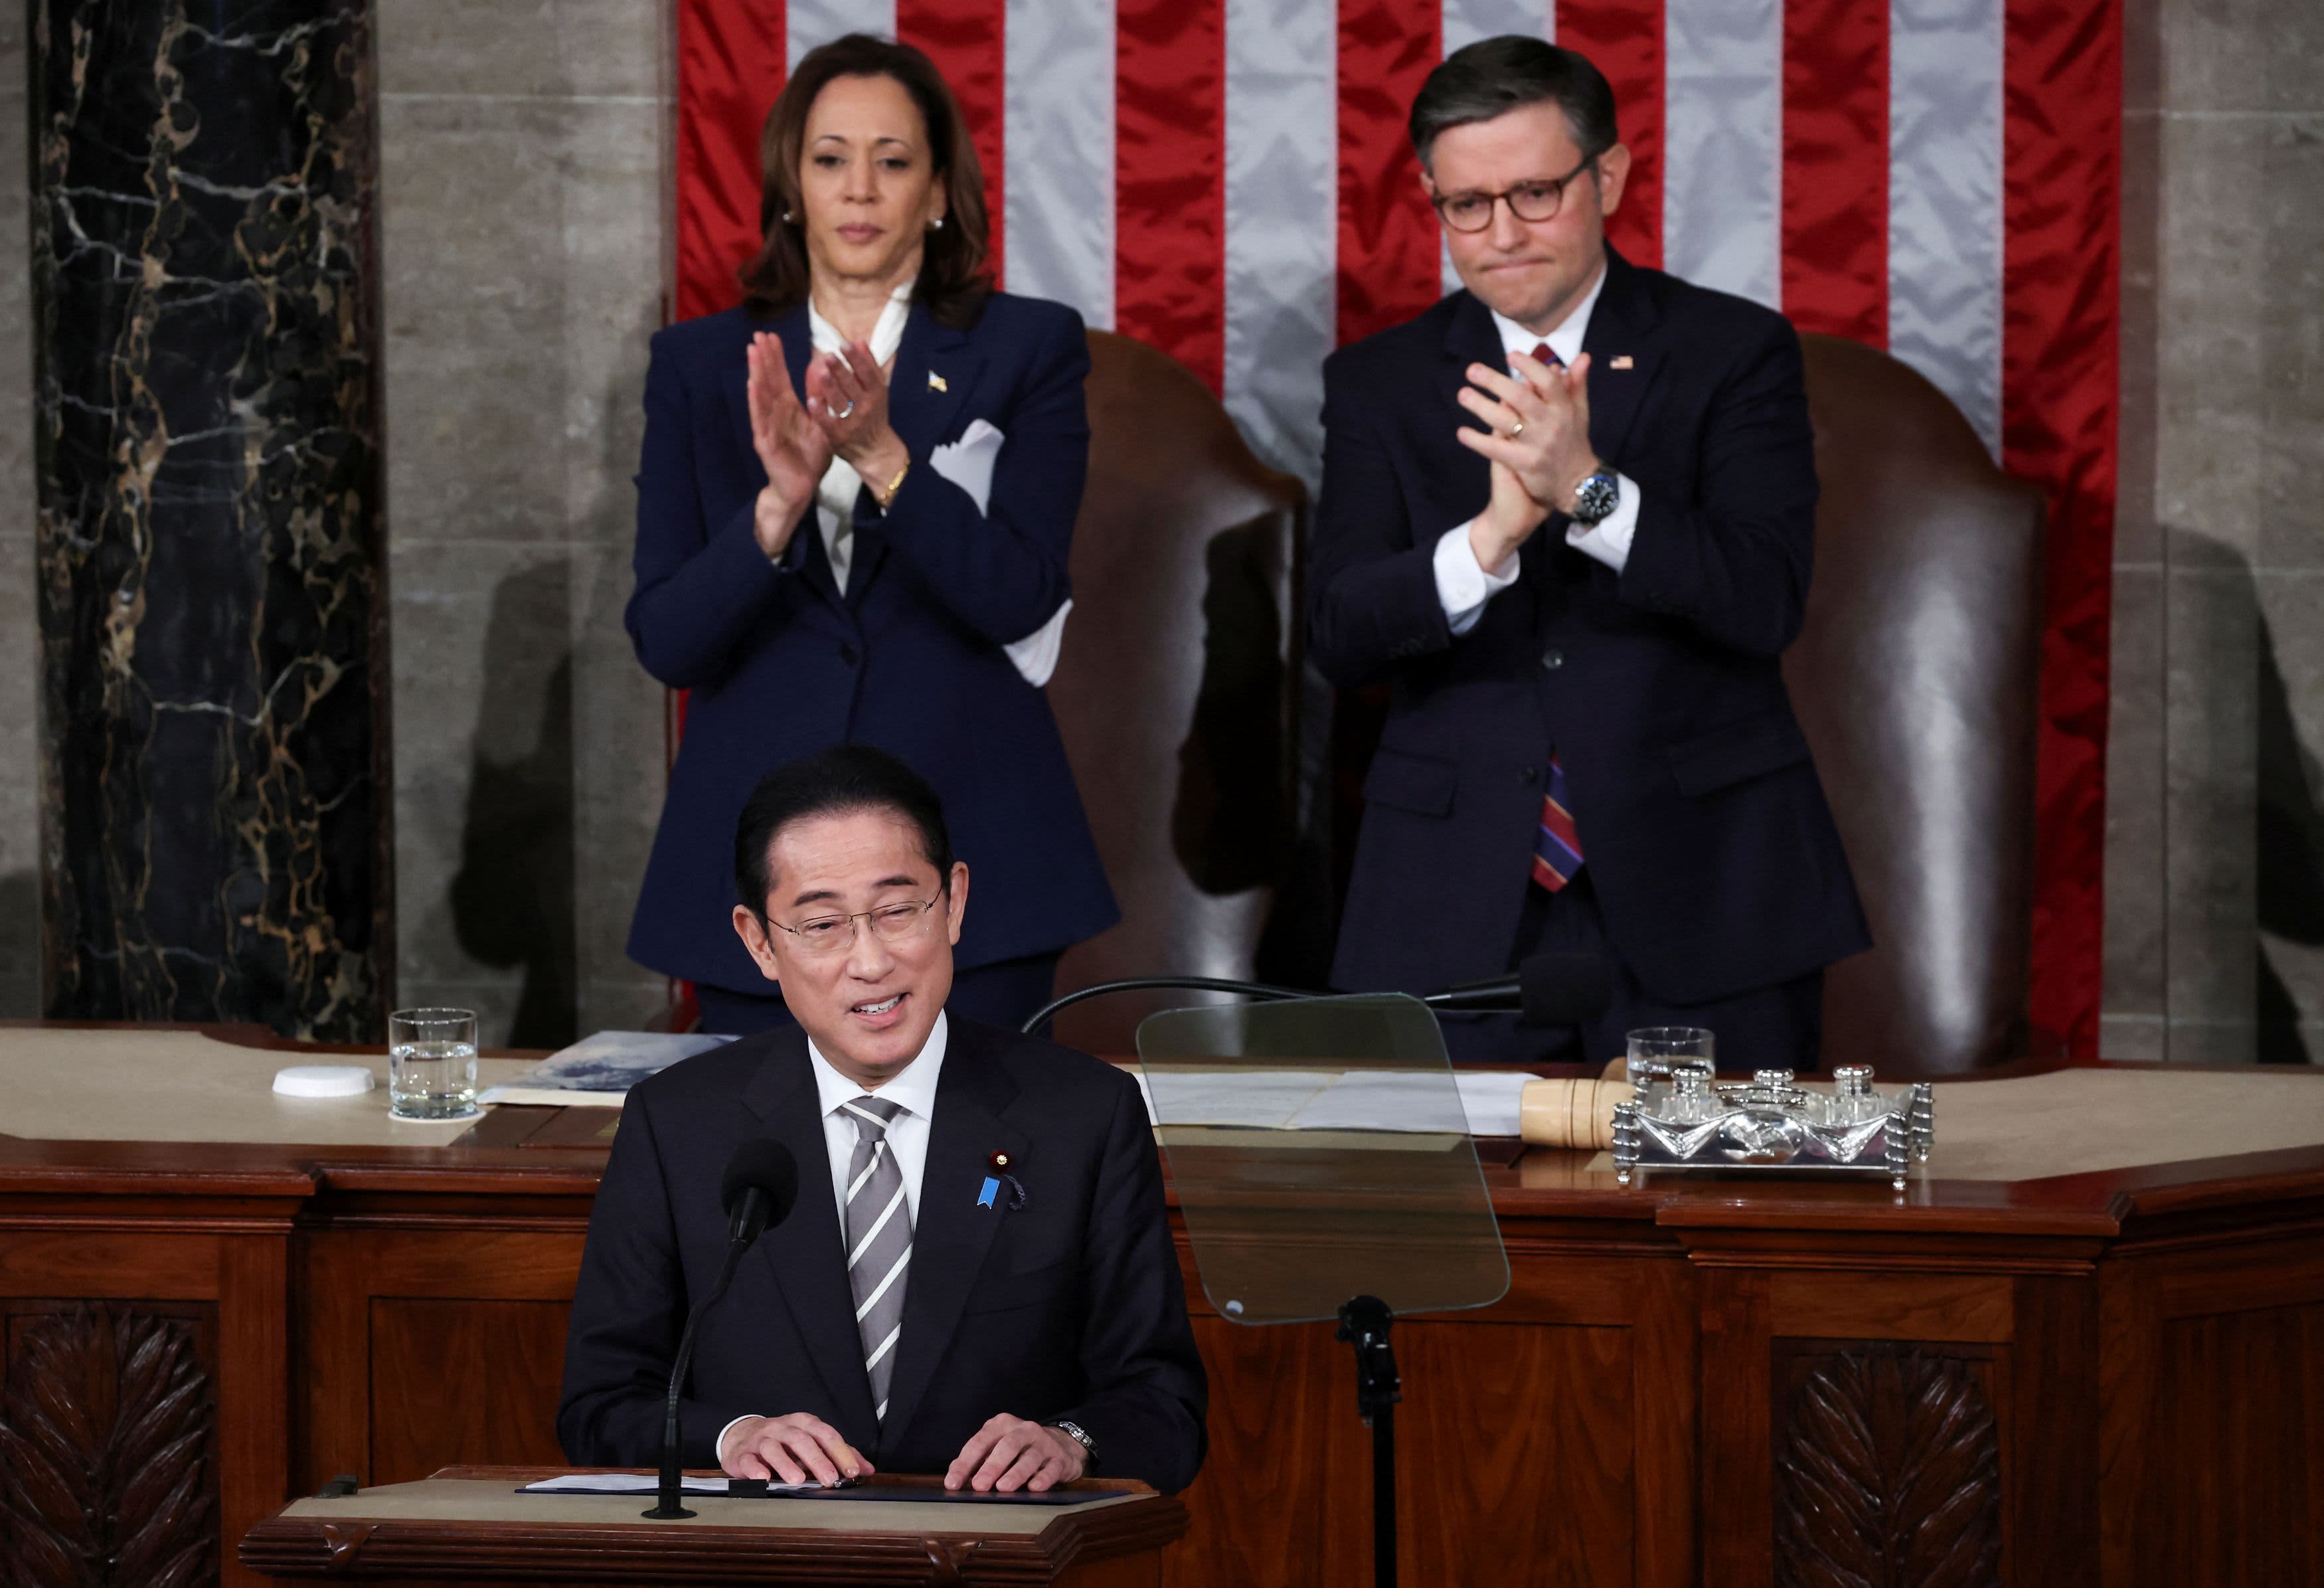 Japanese Prime Minister Kishida emphasizes the importance of the United States taking a leading role in global affairs